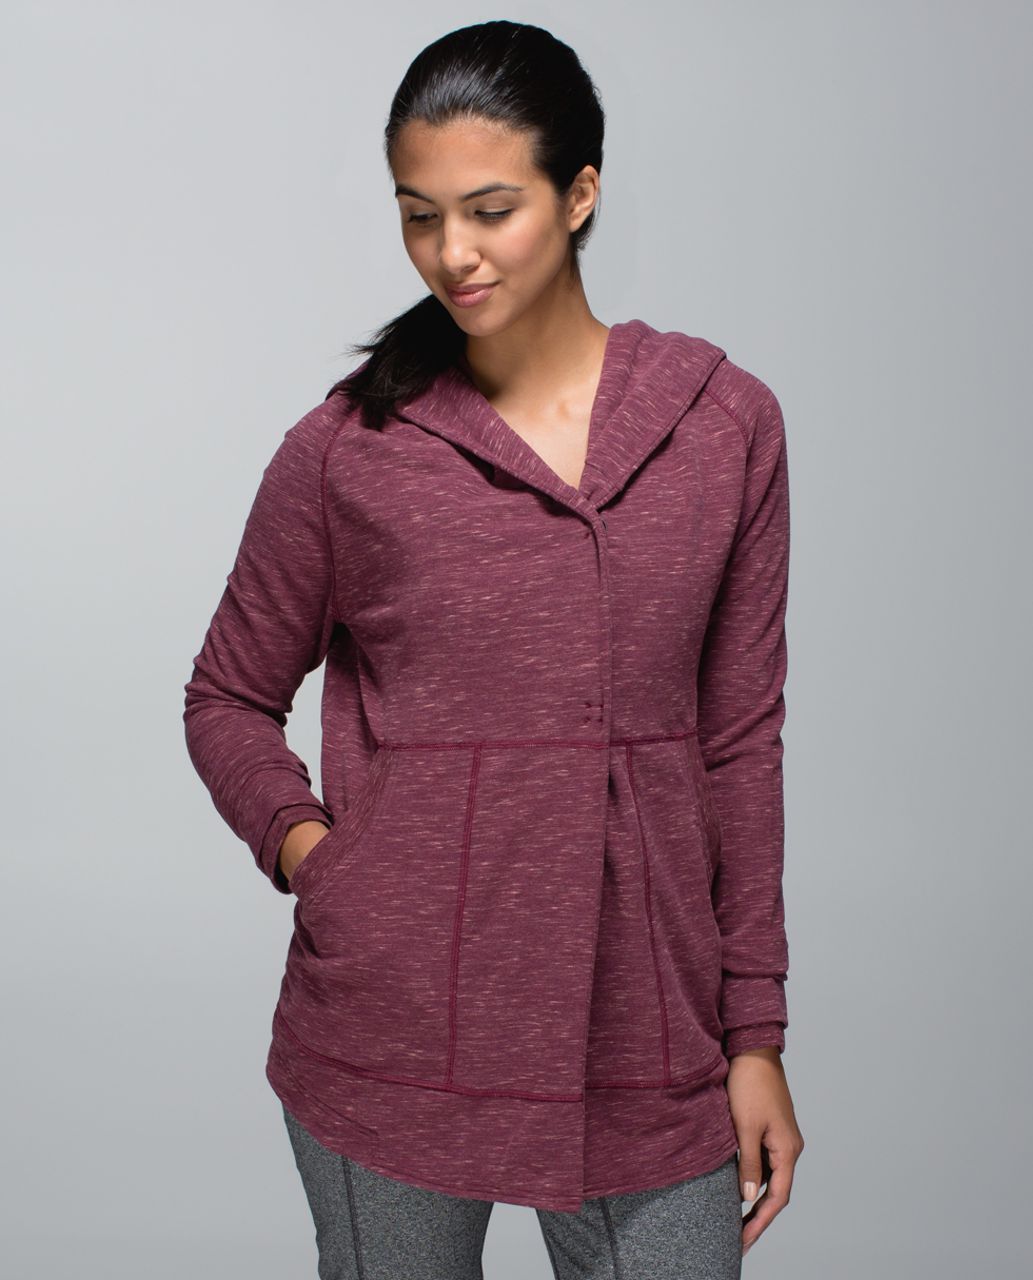 Lululemon Find Your Centre Wrap - Heathered Marled Rust Berry